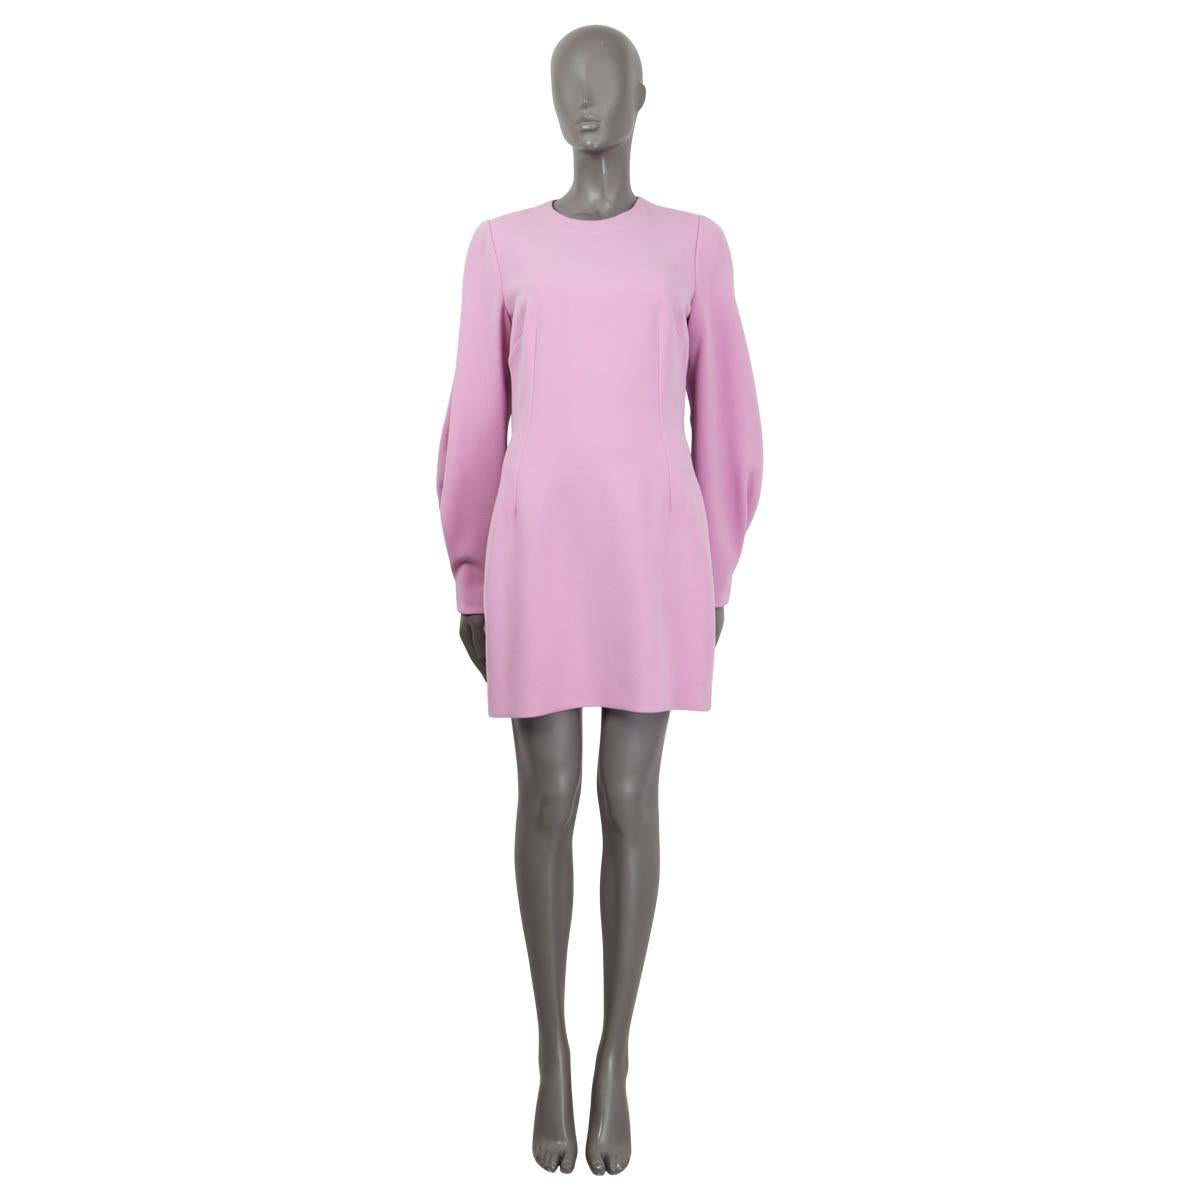 100% authentic Dolce & Gabban long sleeve mini dress in lilac polyester (66%), viscose (30%) and elastane (4%). The design features a round-neck and pleats sleeves. Opens with a hidden zipper at the back. Brand new with tags. 

Measurements
Tag